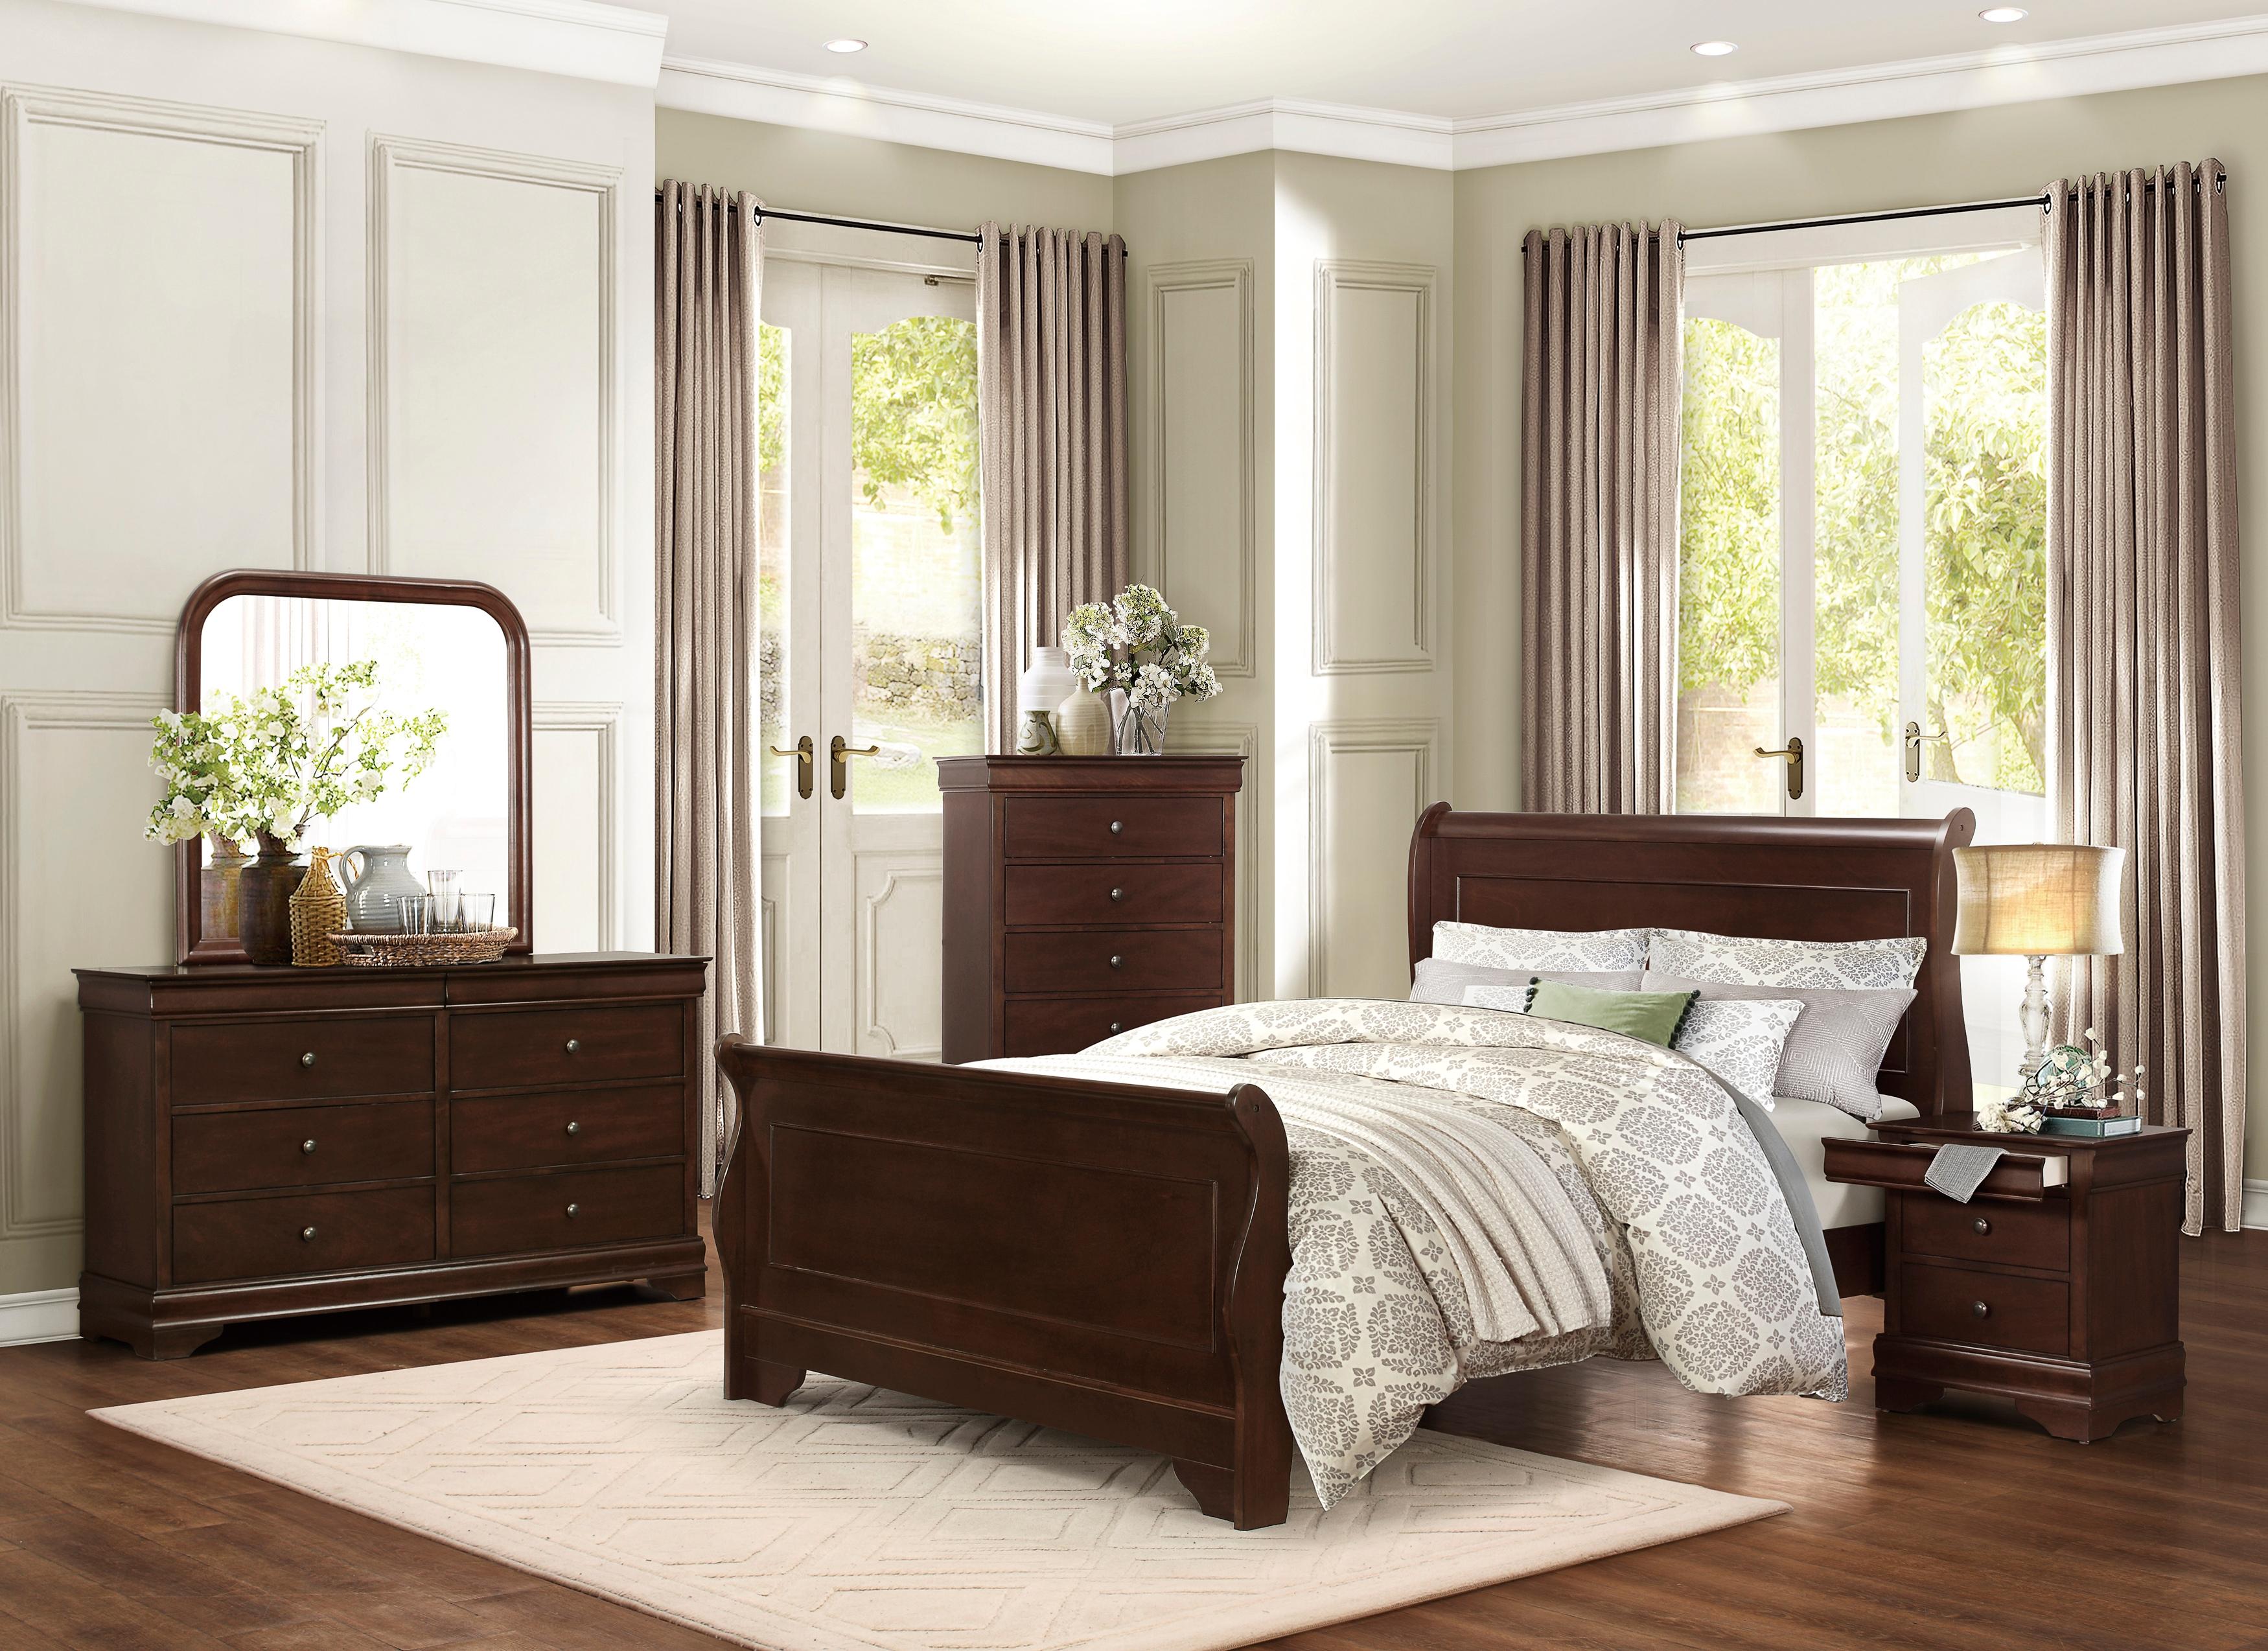 Modern Bedroom Set 1856F-1-6PC Abbeville 1856F-1-6PC in Cherry 